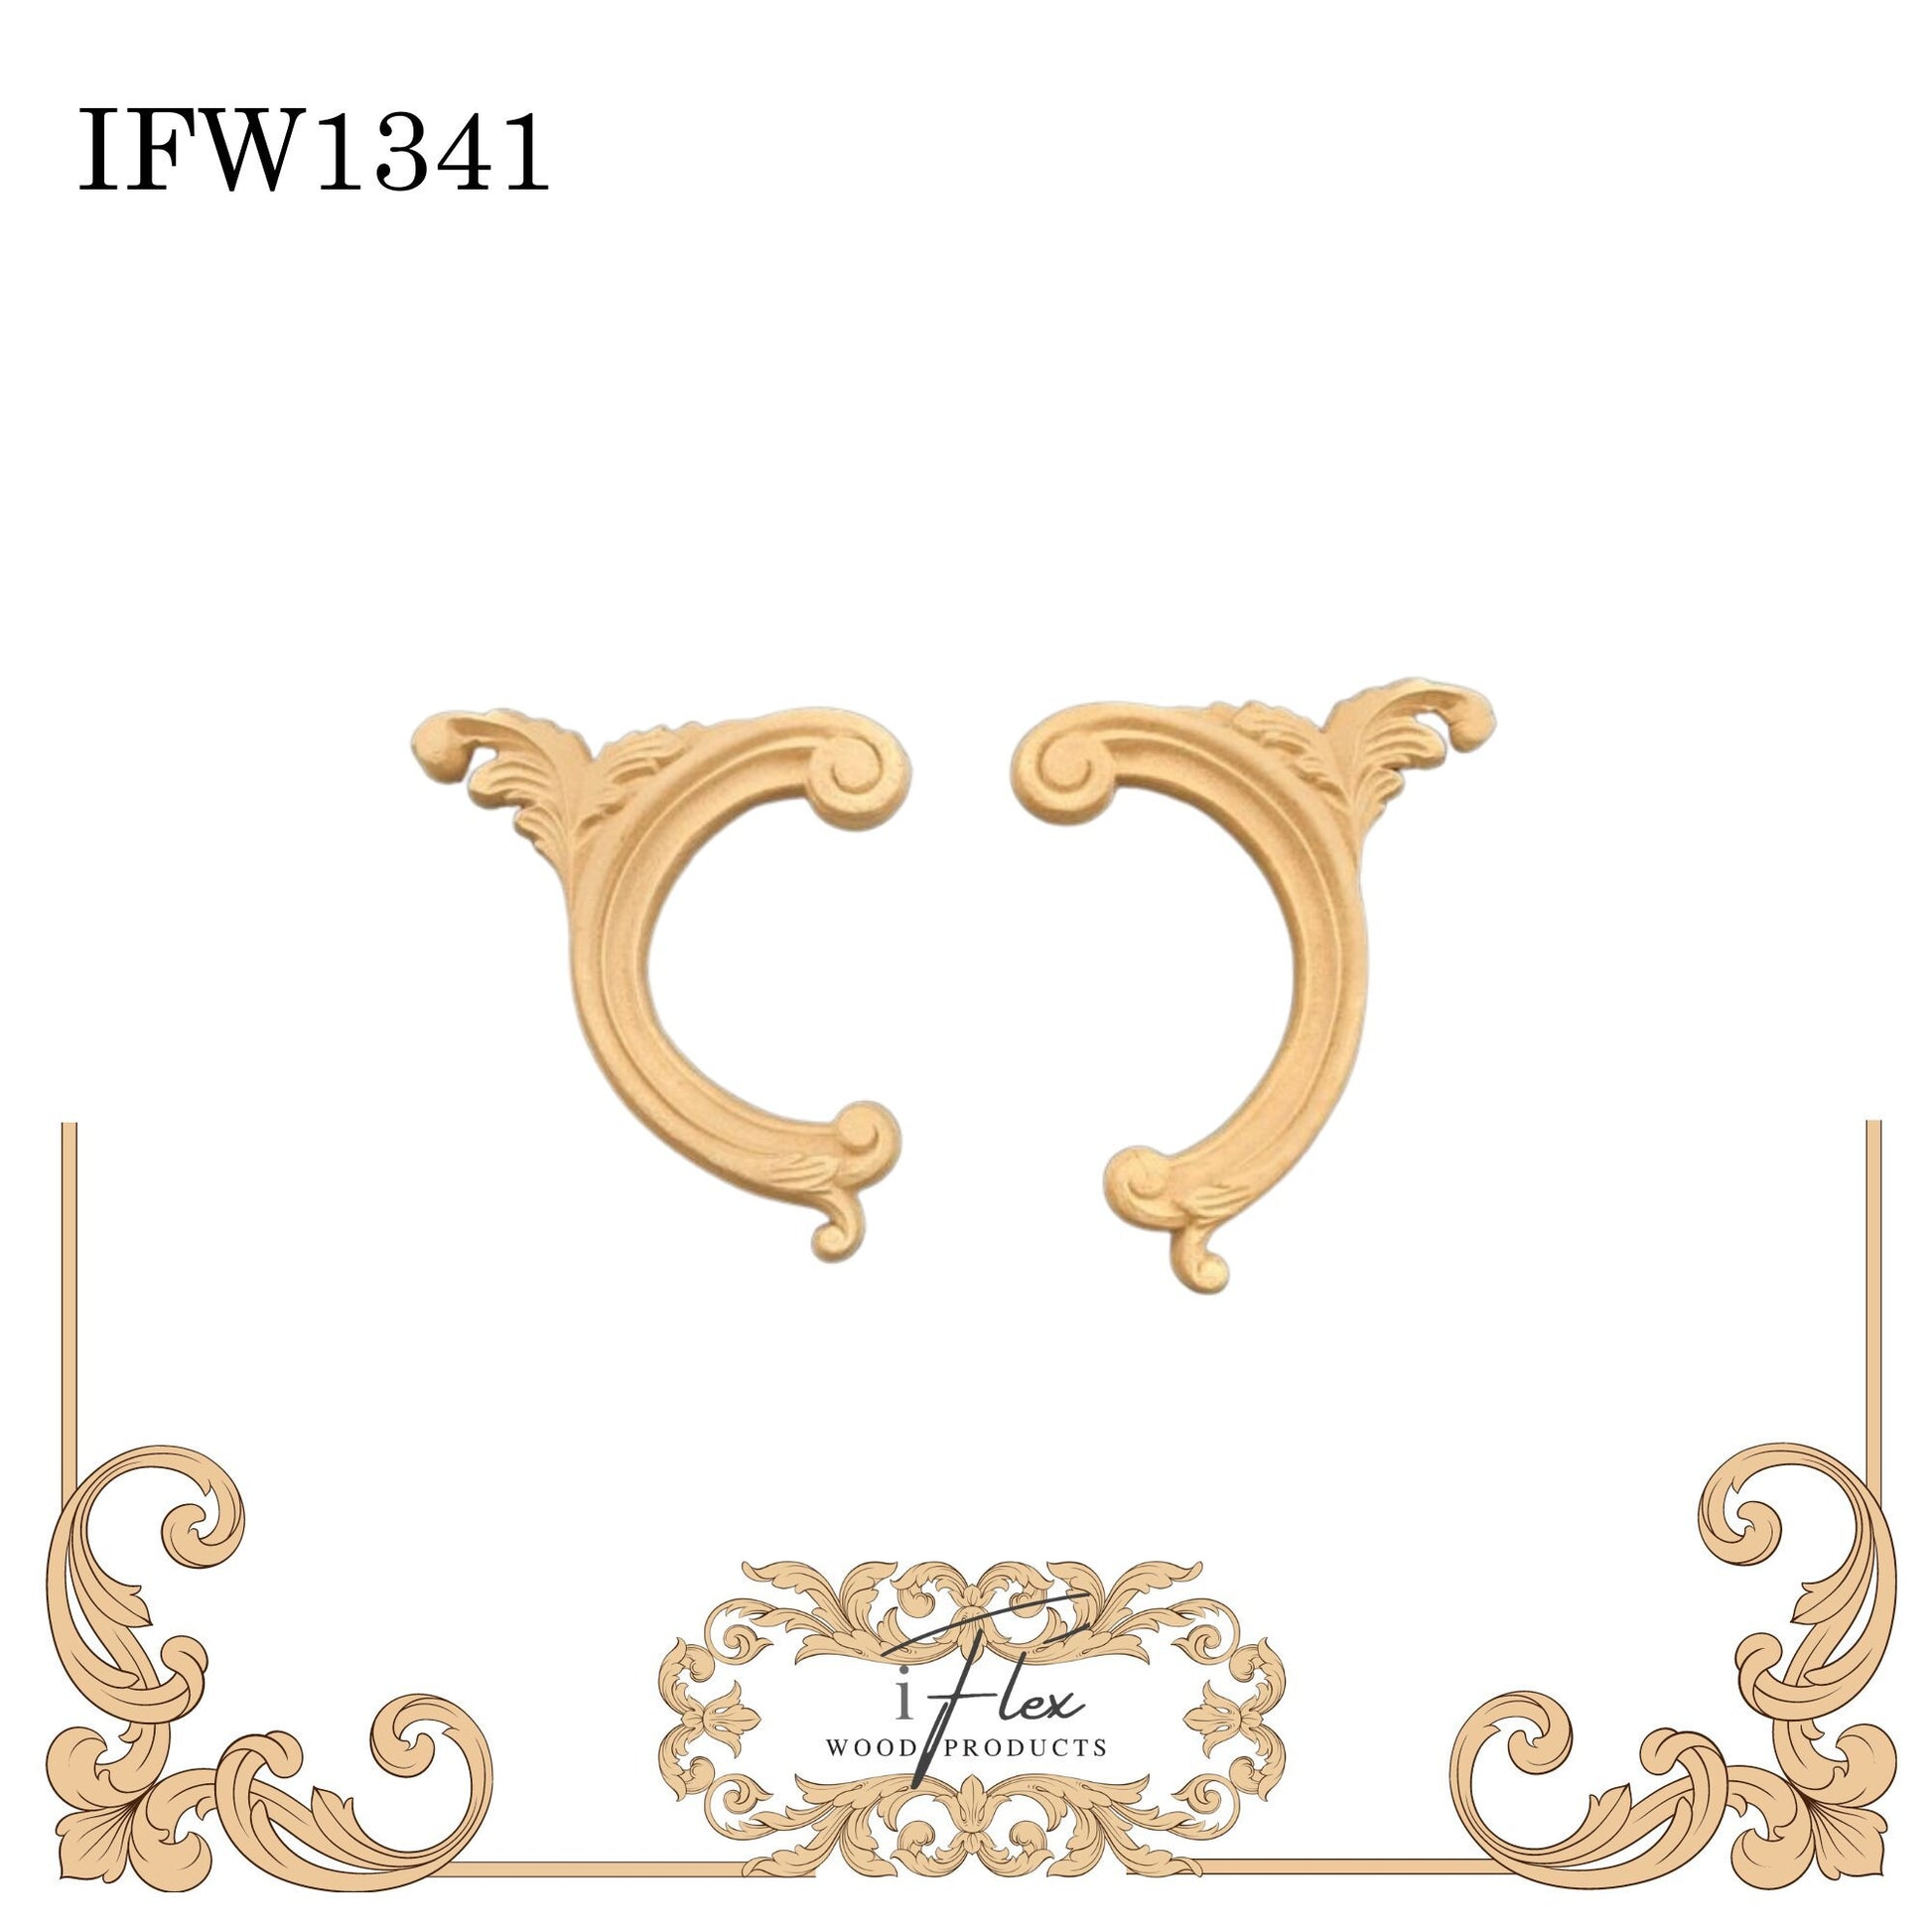 IFW 1341 iFlex Wood Products, bendable mouldings, flexible, wooden appliques, scroll pair